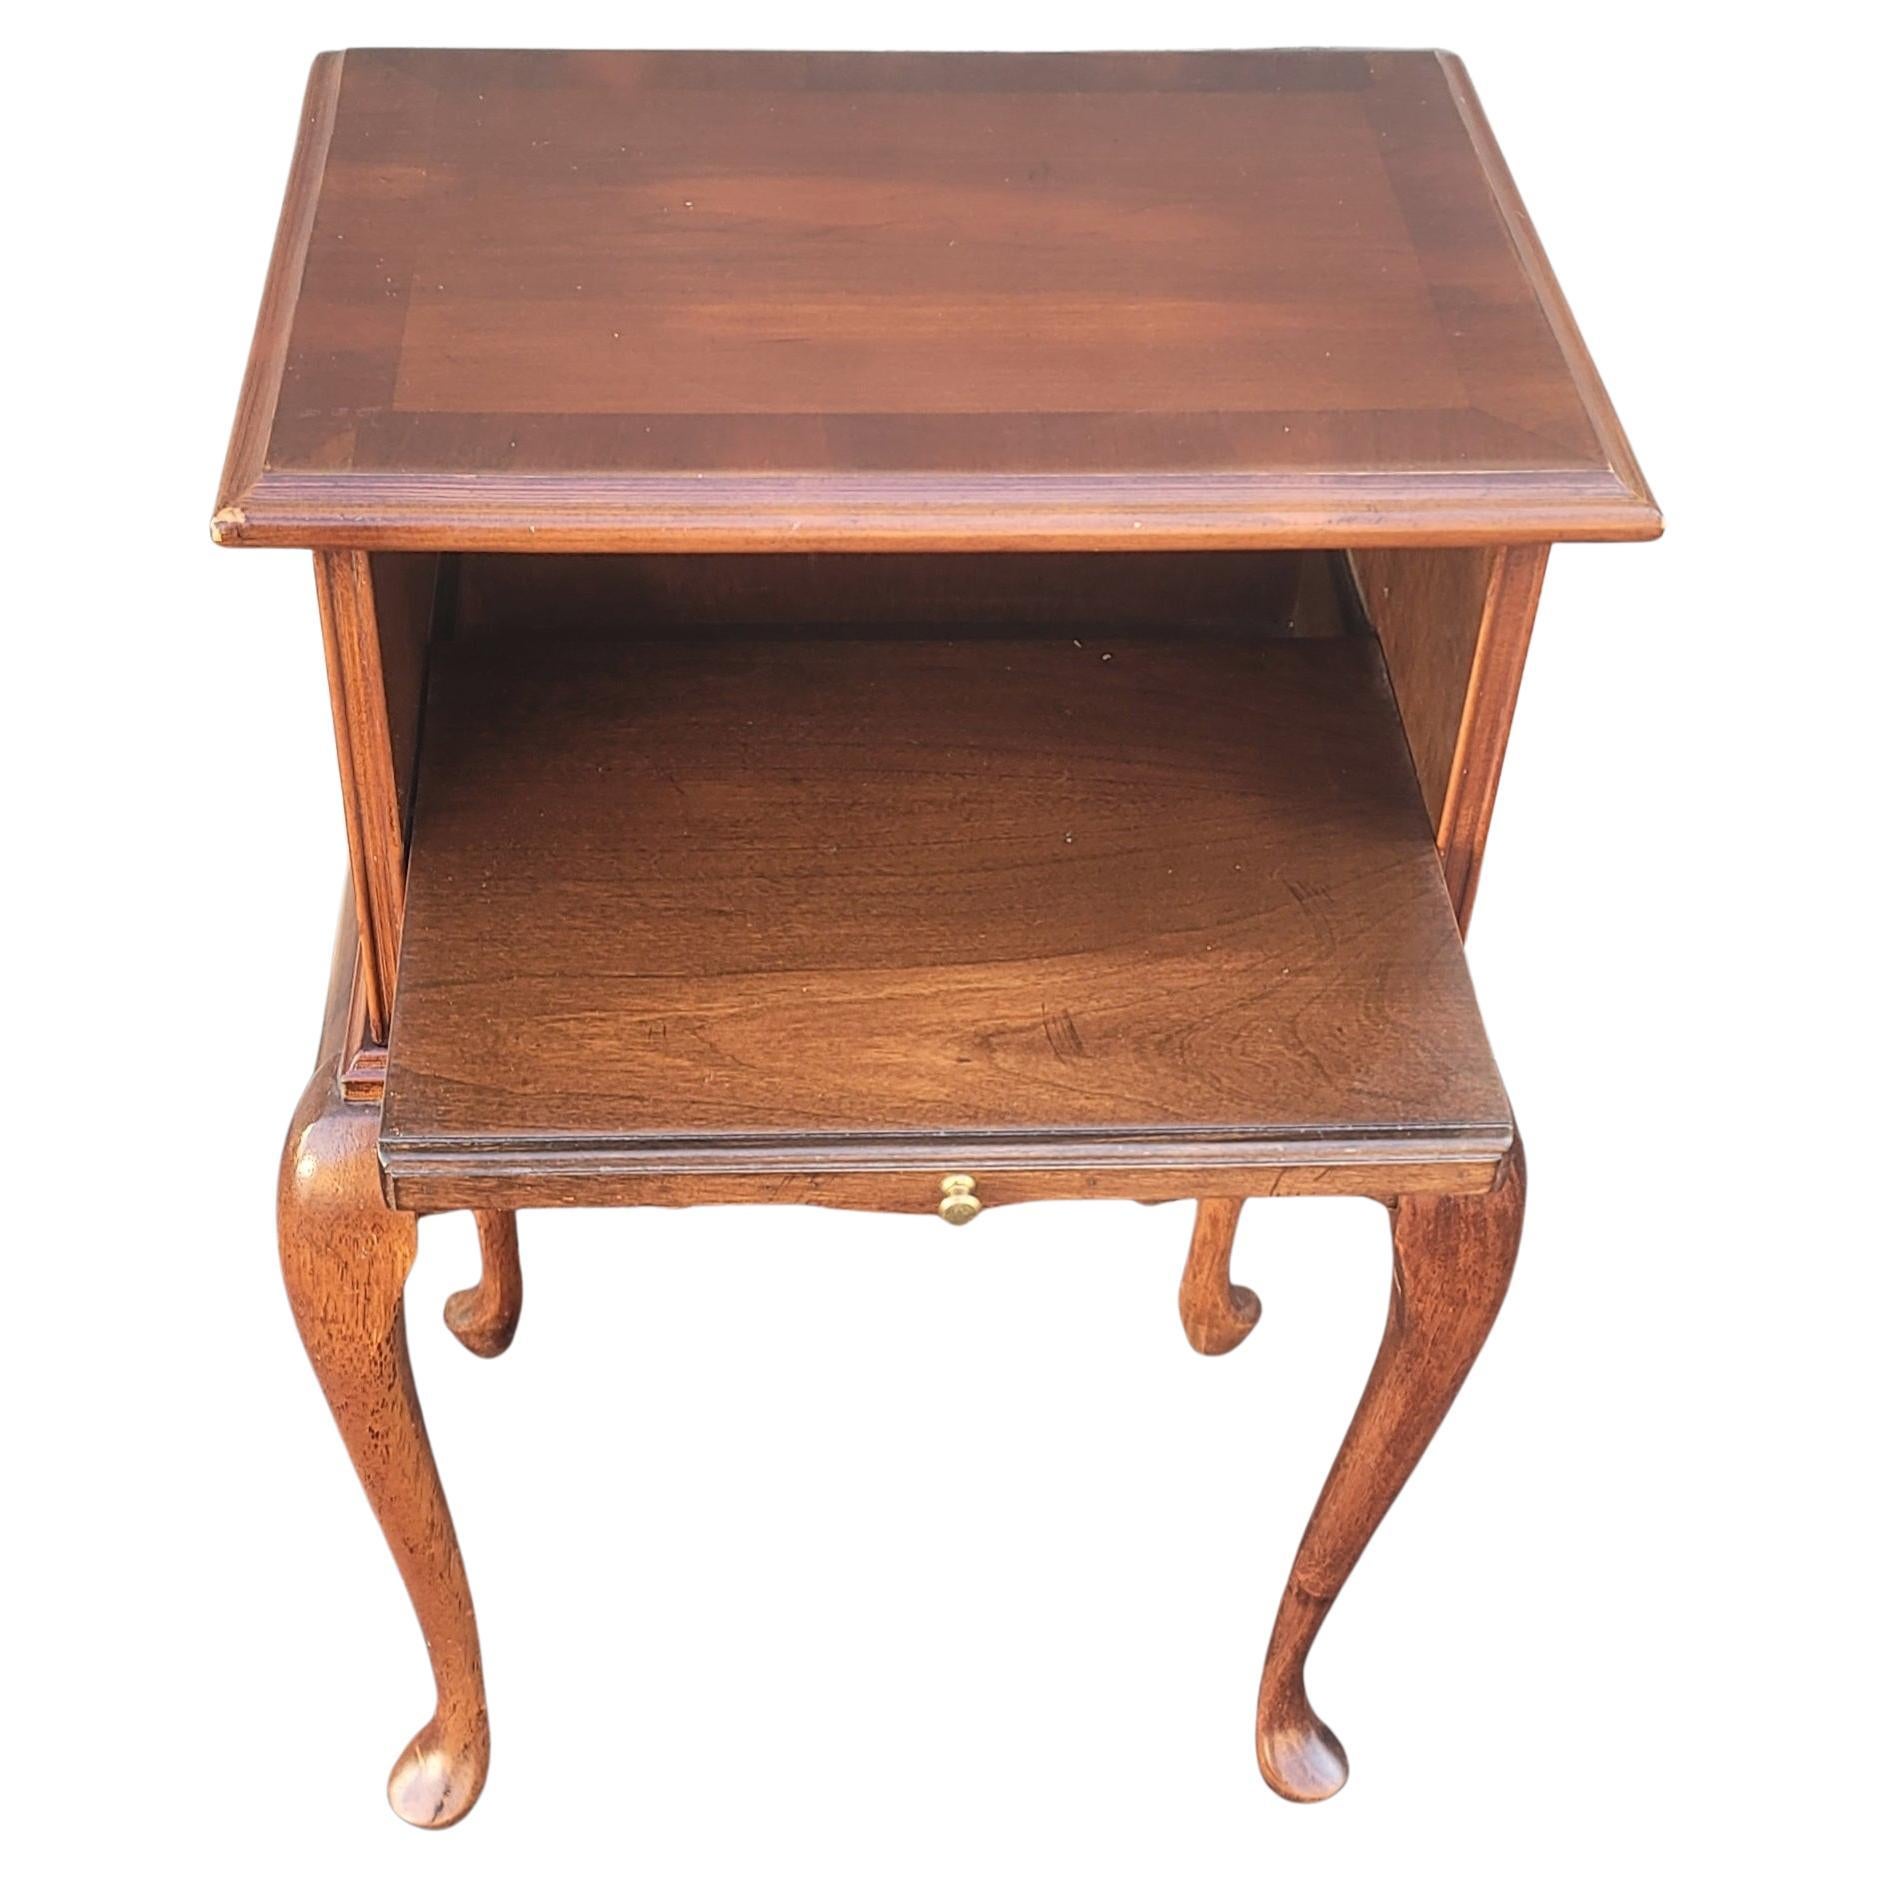 Woodwork Queen Anne Style Lamp Table Candle Stand with Pull-Out Tray For Sale